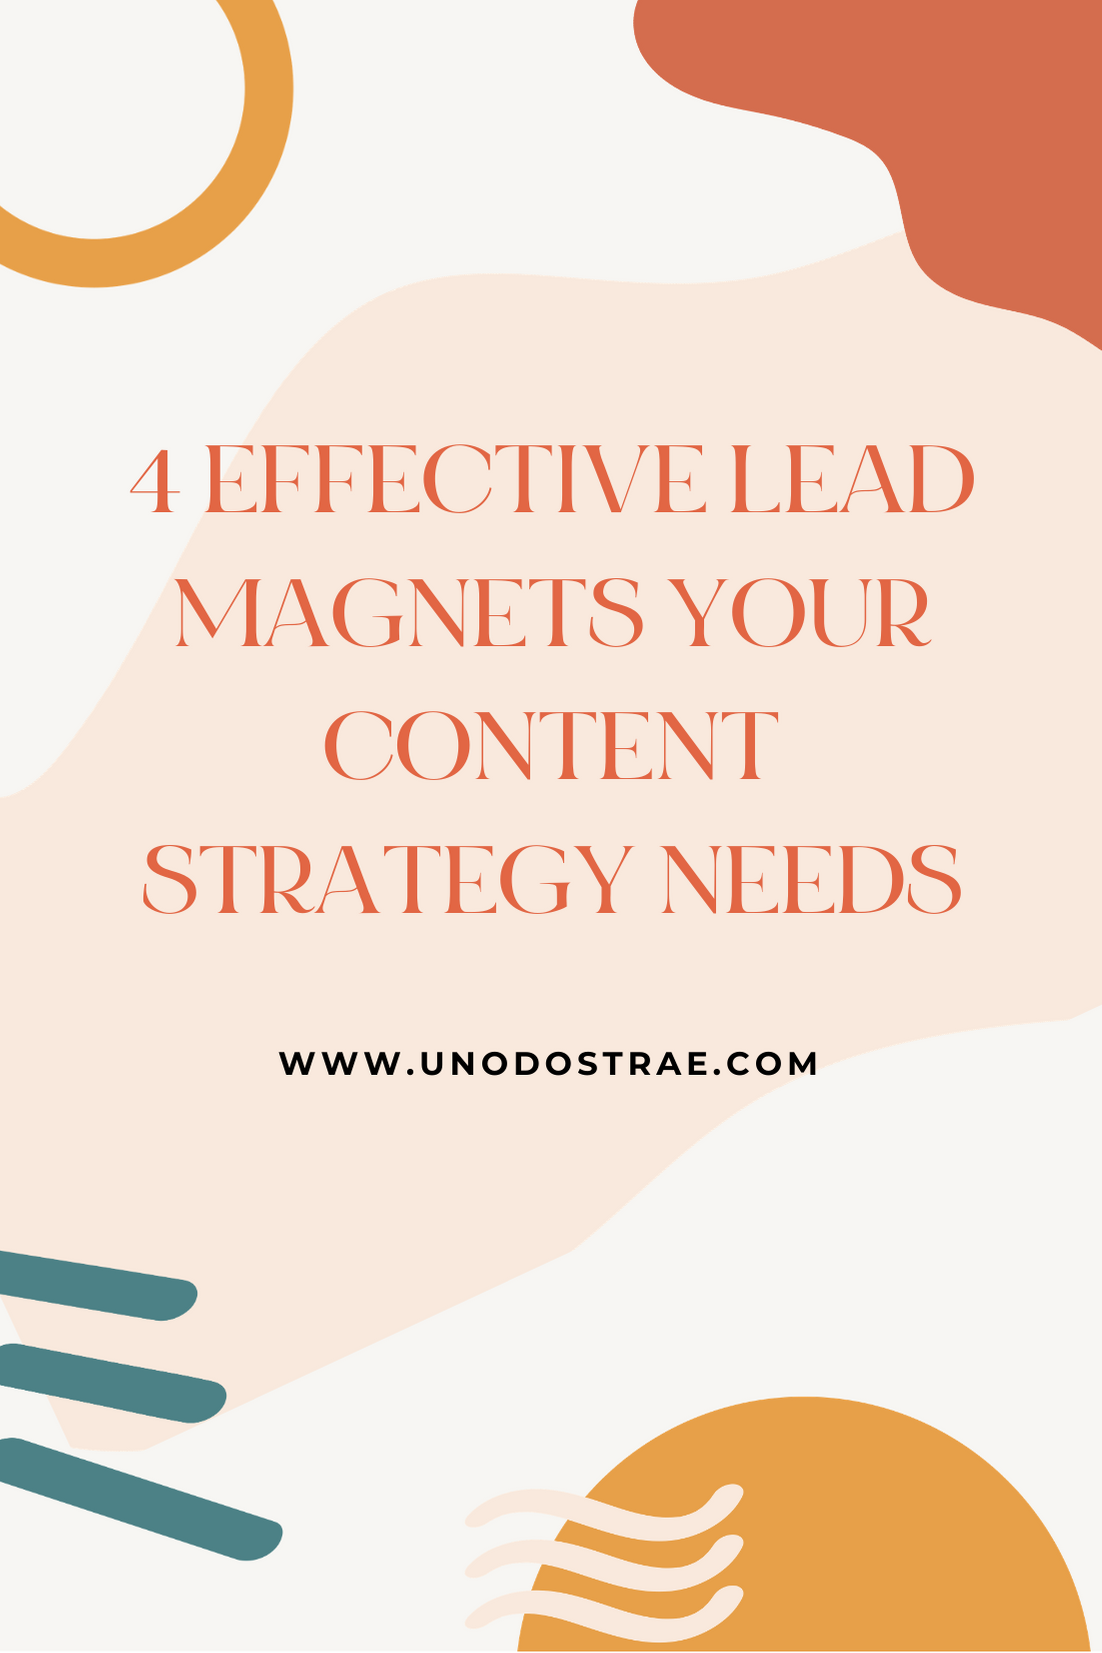 Lead magnets are an important aspect of growing your email list. From a brand quiz to an entire resource library of free resources and tools, I’ve been able to grow my email list quite successfully using lead magnets and content upgrades as part of my content strategy. When it comes to creating solid lead magnets that can help build brand trust with your audience, it all comes down to the extra value you can provide them with. Can you create a tool (i.e. template, checklist, etc.) that helps them implement your strategies with? Is there a step-by-step guide you can provide that walks them through your method or framework? I’m not in the business of dry freebies over here, and I think that’s served me really well. This article discusses 4 lead magnets you can get started with today.